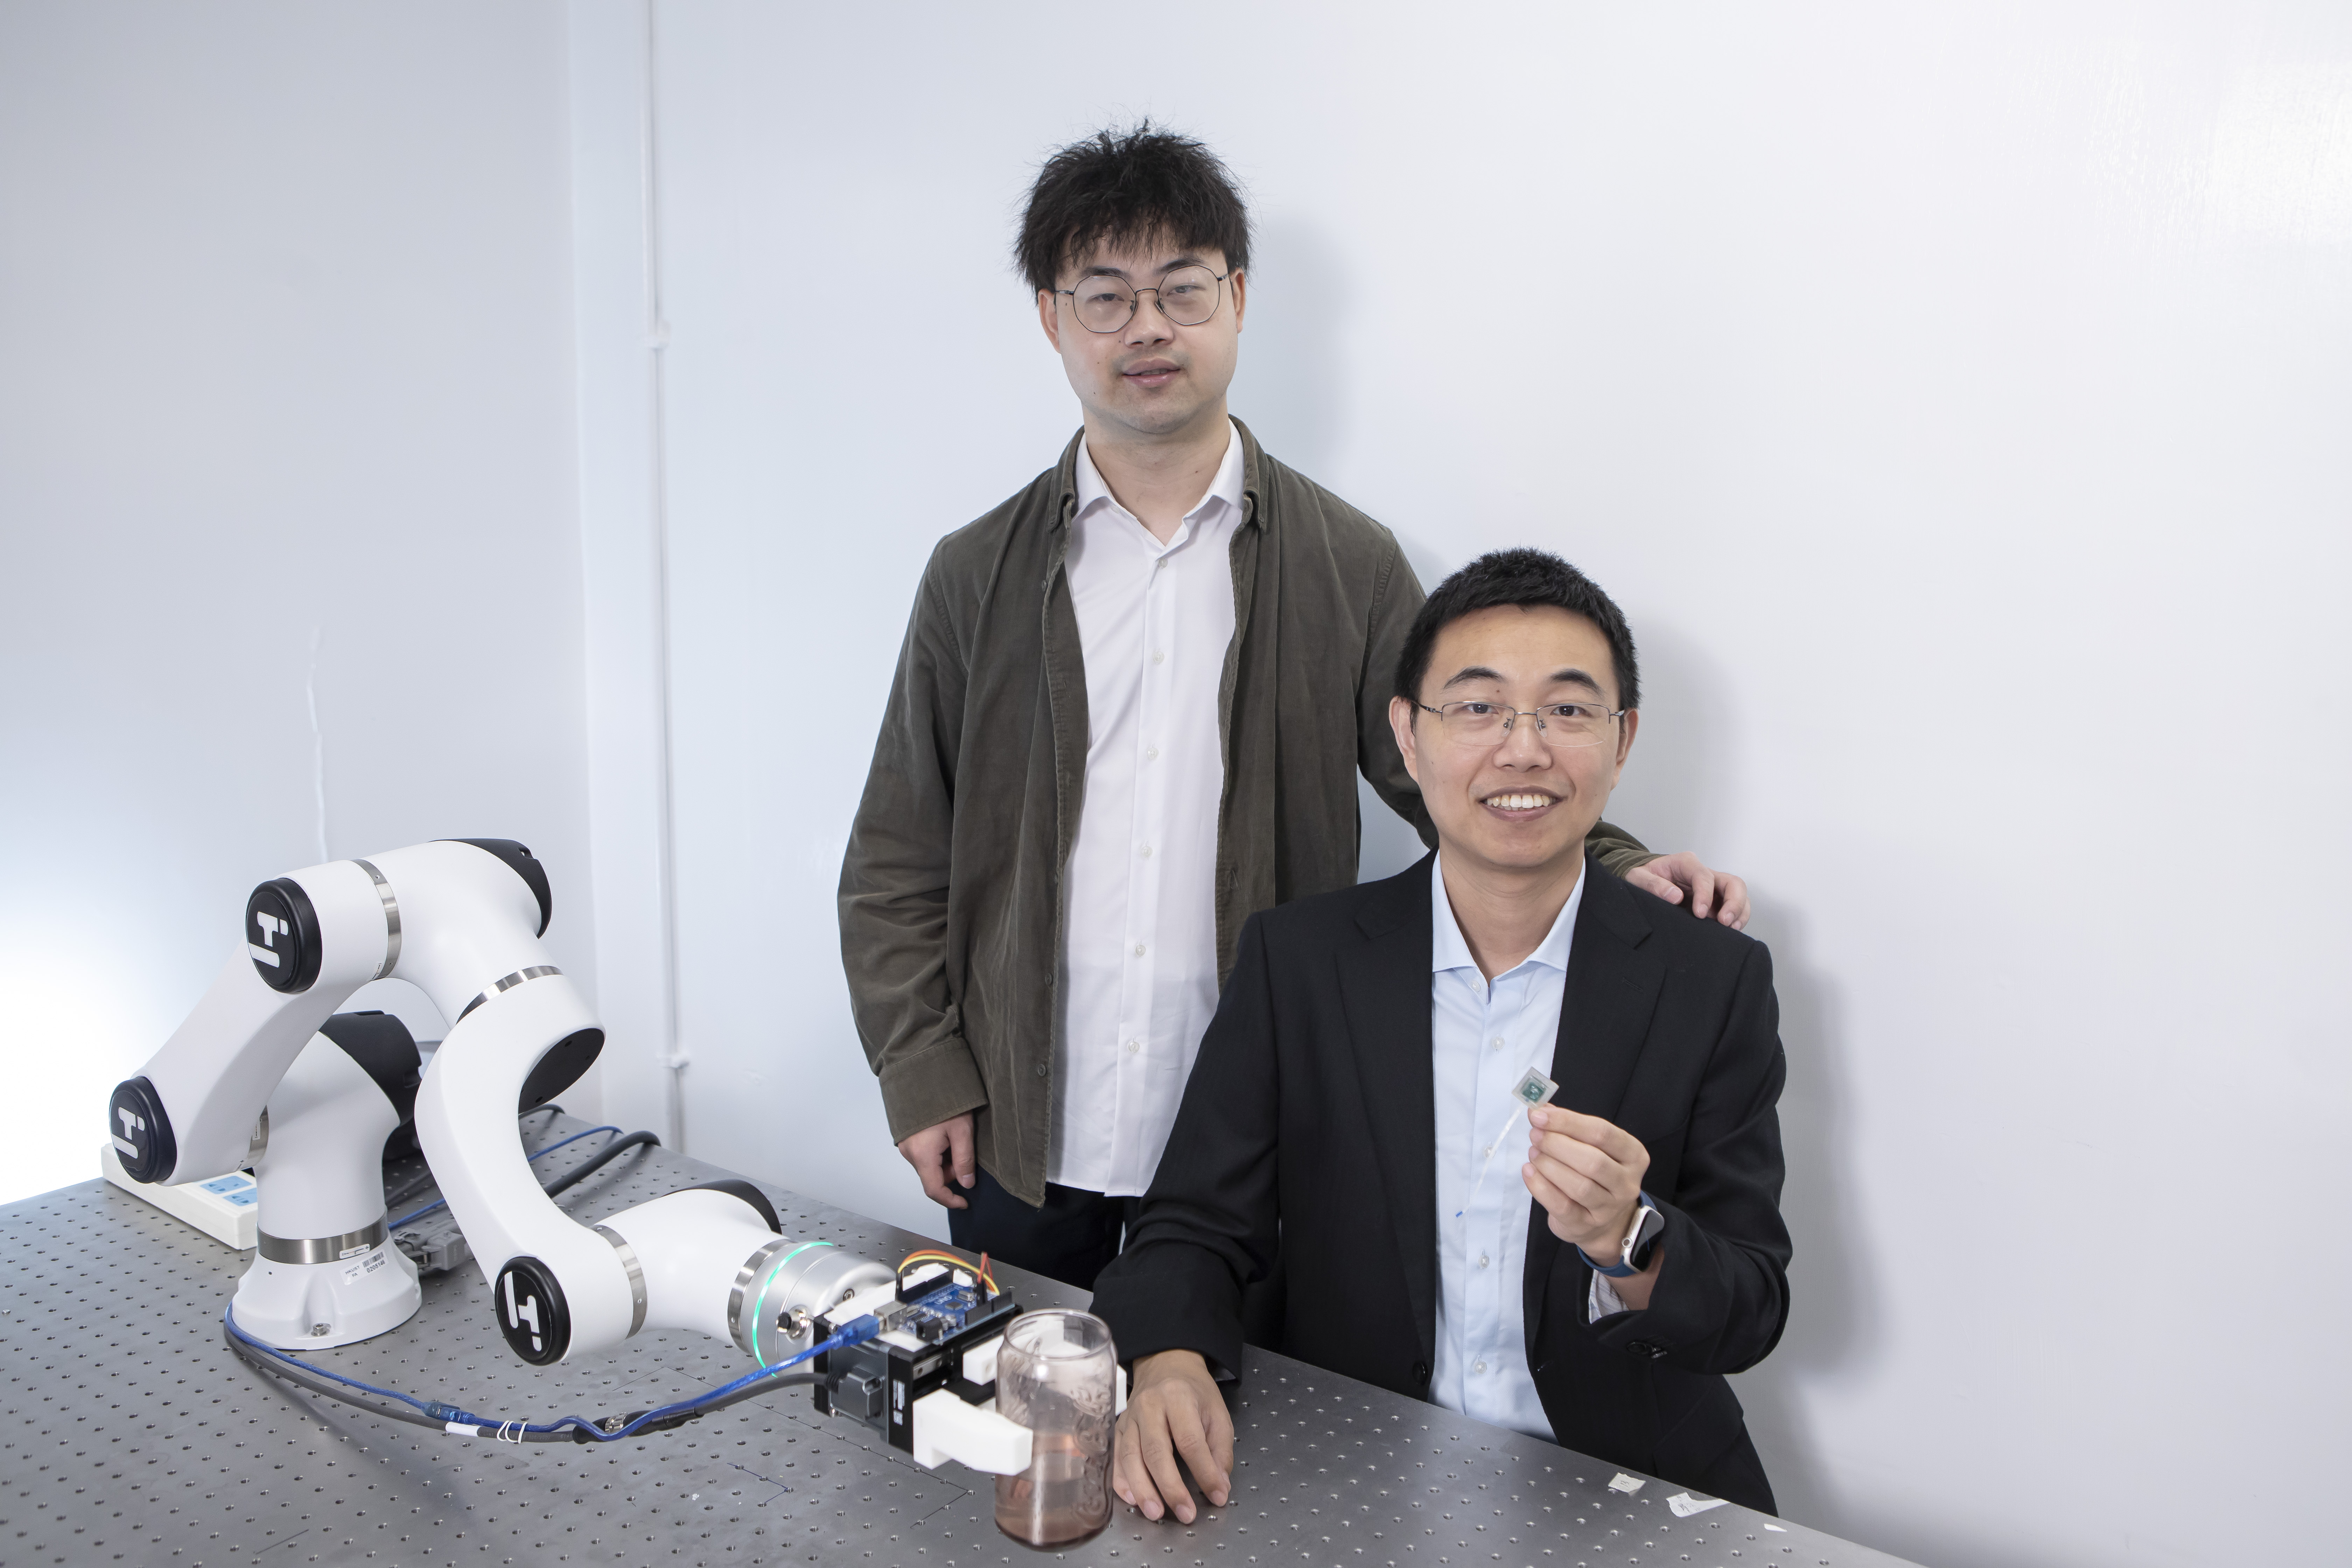 “Agile Executive Terminal for Robots”, one of the participating projects of the first batch of RAISe+ Scheme, is led by Prof. SHEN Yajing, Associate Professor of HKUST Department of Electronic and Computer Engineering (right), along with Dr. YANG Xiong, Research Assistant Professor of HKUST Department of Electronic and Computer Engineering (left).